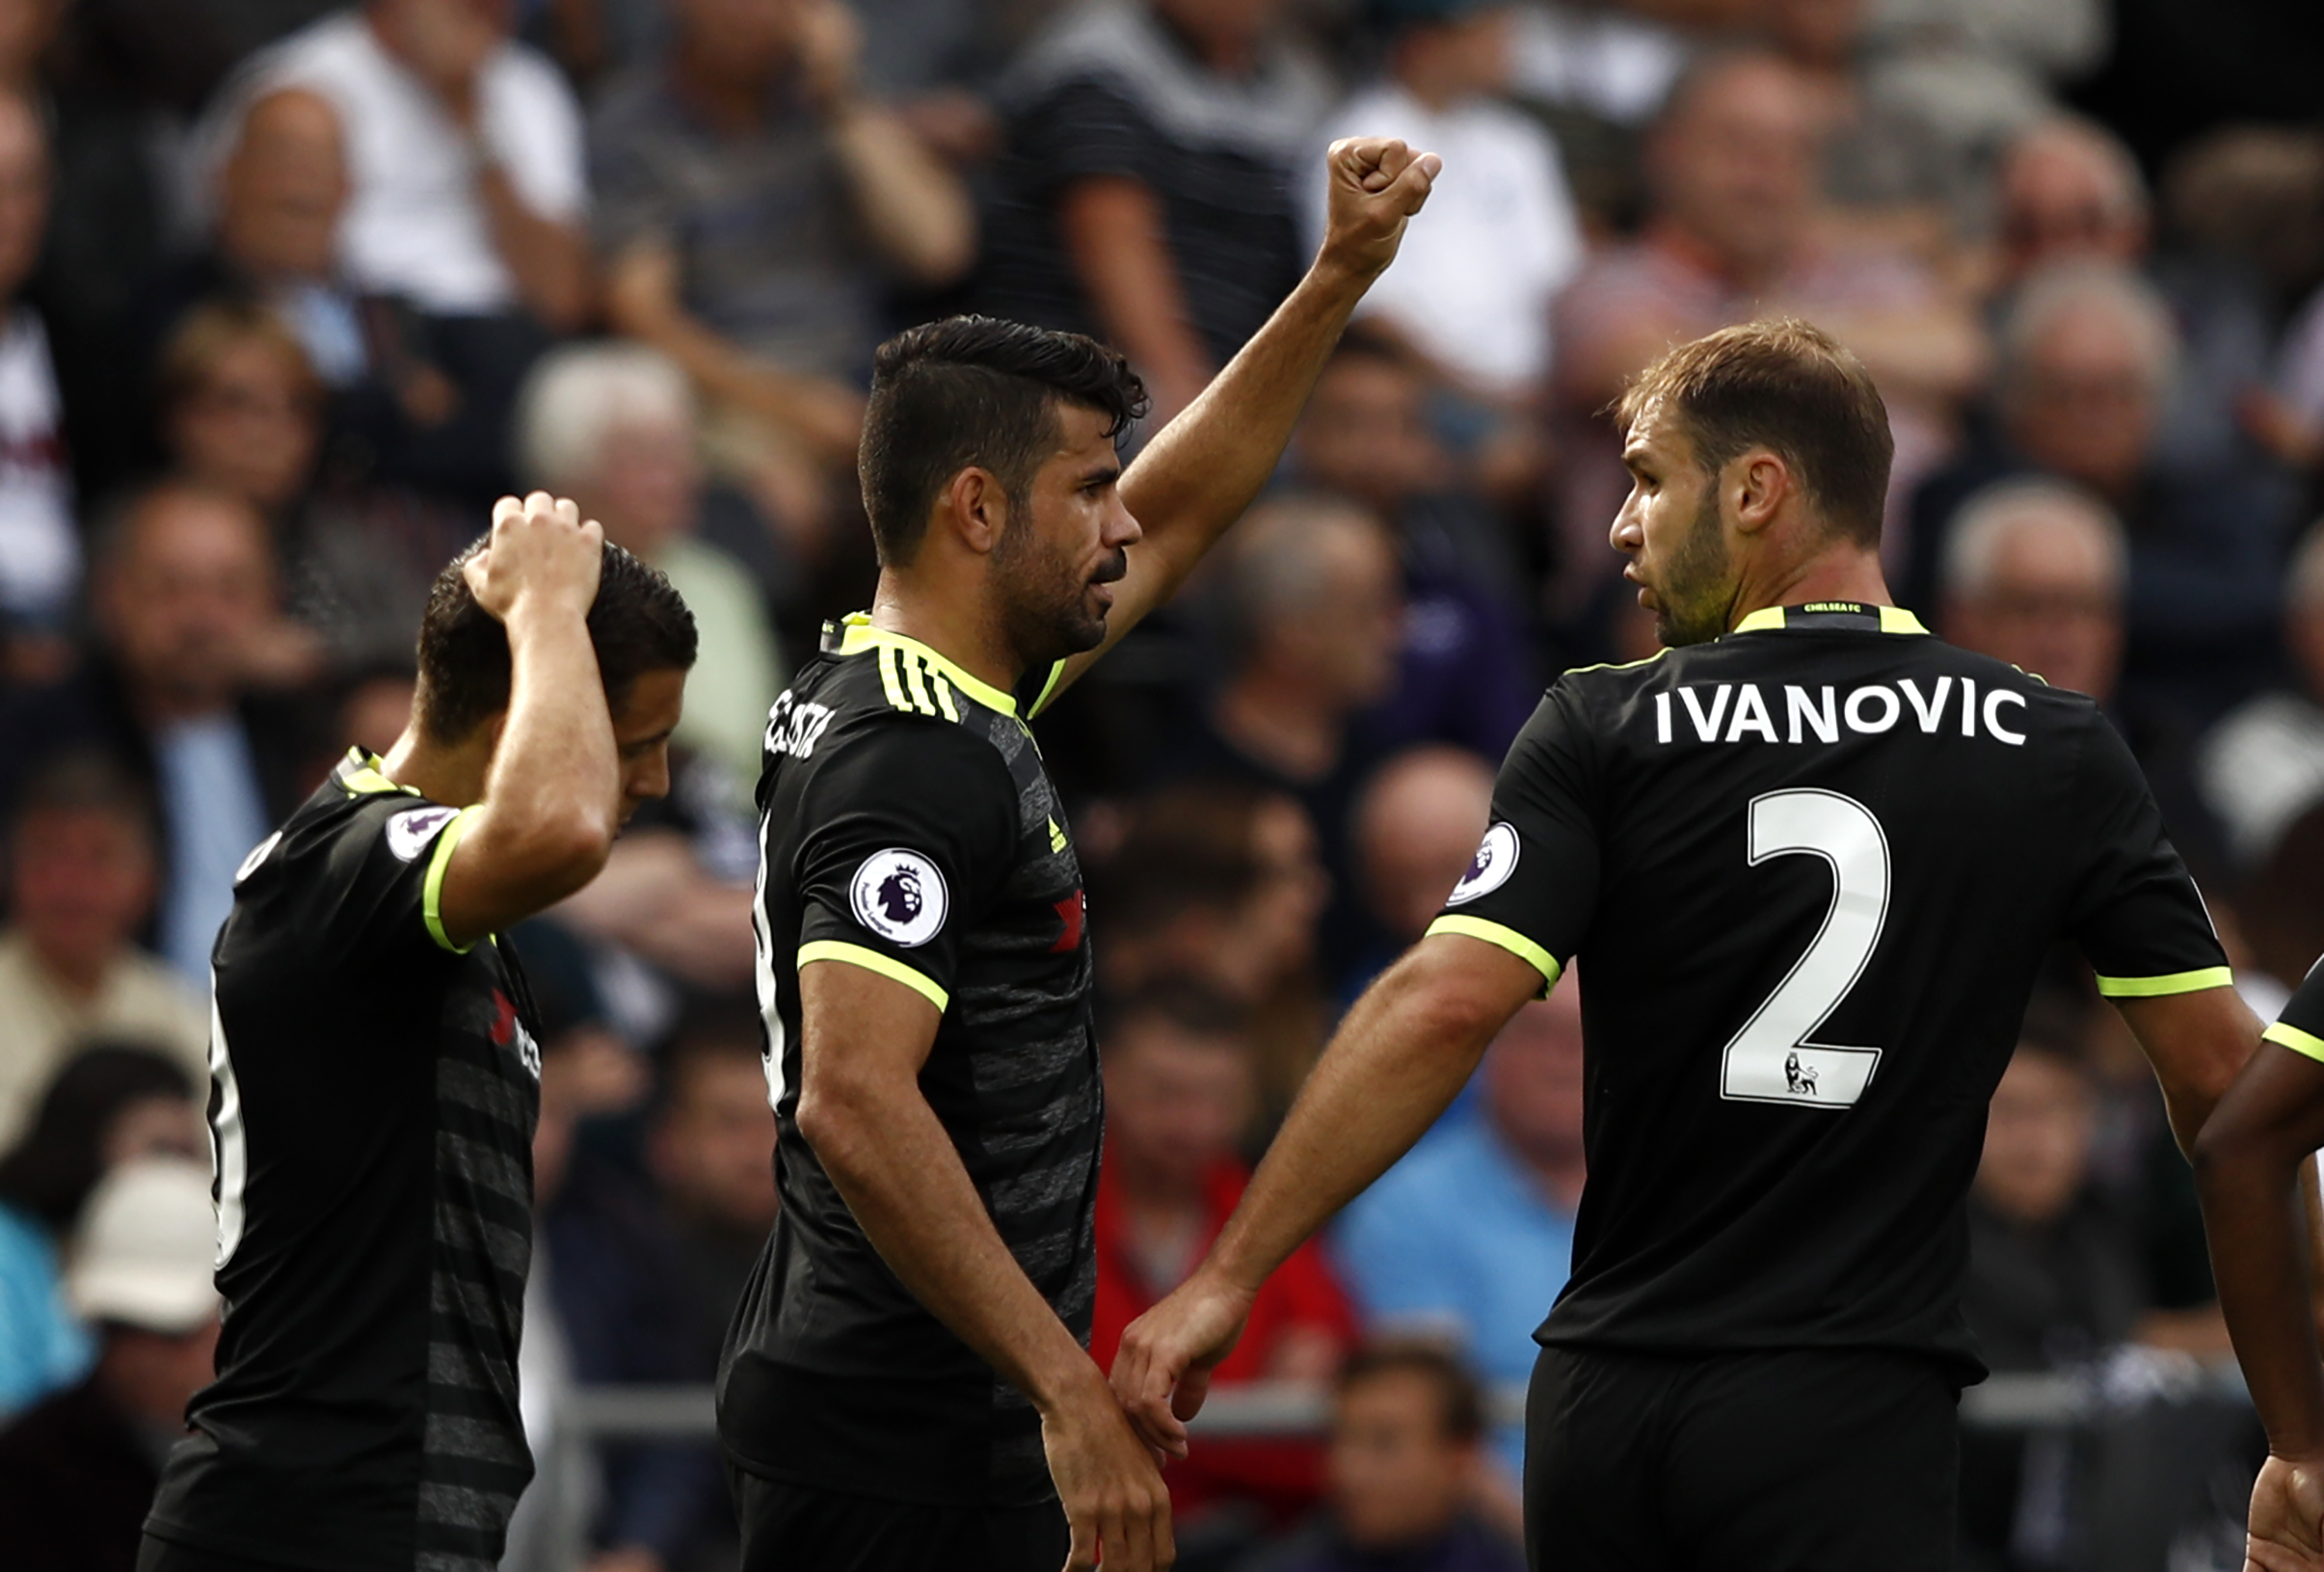 Chelsea's Brazilian-born Spanish striker Diego Costa (C) celebrates after scoring the opening goal of the English Premier League football match between Swansea City and Chelsea at The Liberty Stadium in Swansea, south Wales on September 11, 2016. / AFP / Adrian DENNIS / RESTRICTED TO EDITORIAL USE. No use with unauthorized audio, video, data, fixture lists, club/league logos or 'live' services. Online in-match use limited to 75 images, no video emulation. No use in betting, games or single club/league/player publications.  /         (Photo credit should read ADRIAN DENNIS/AFP/Getty Images)